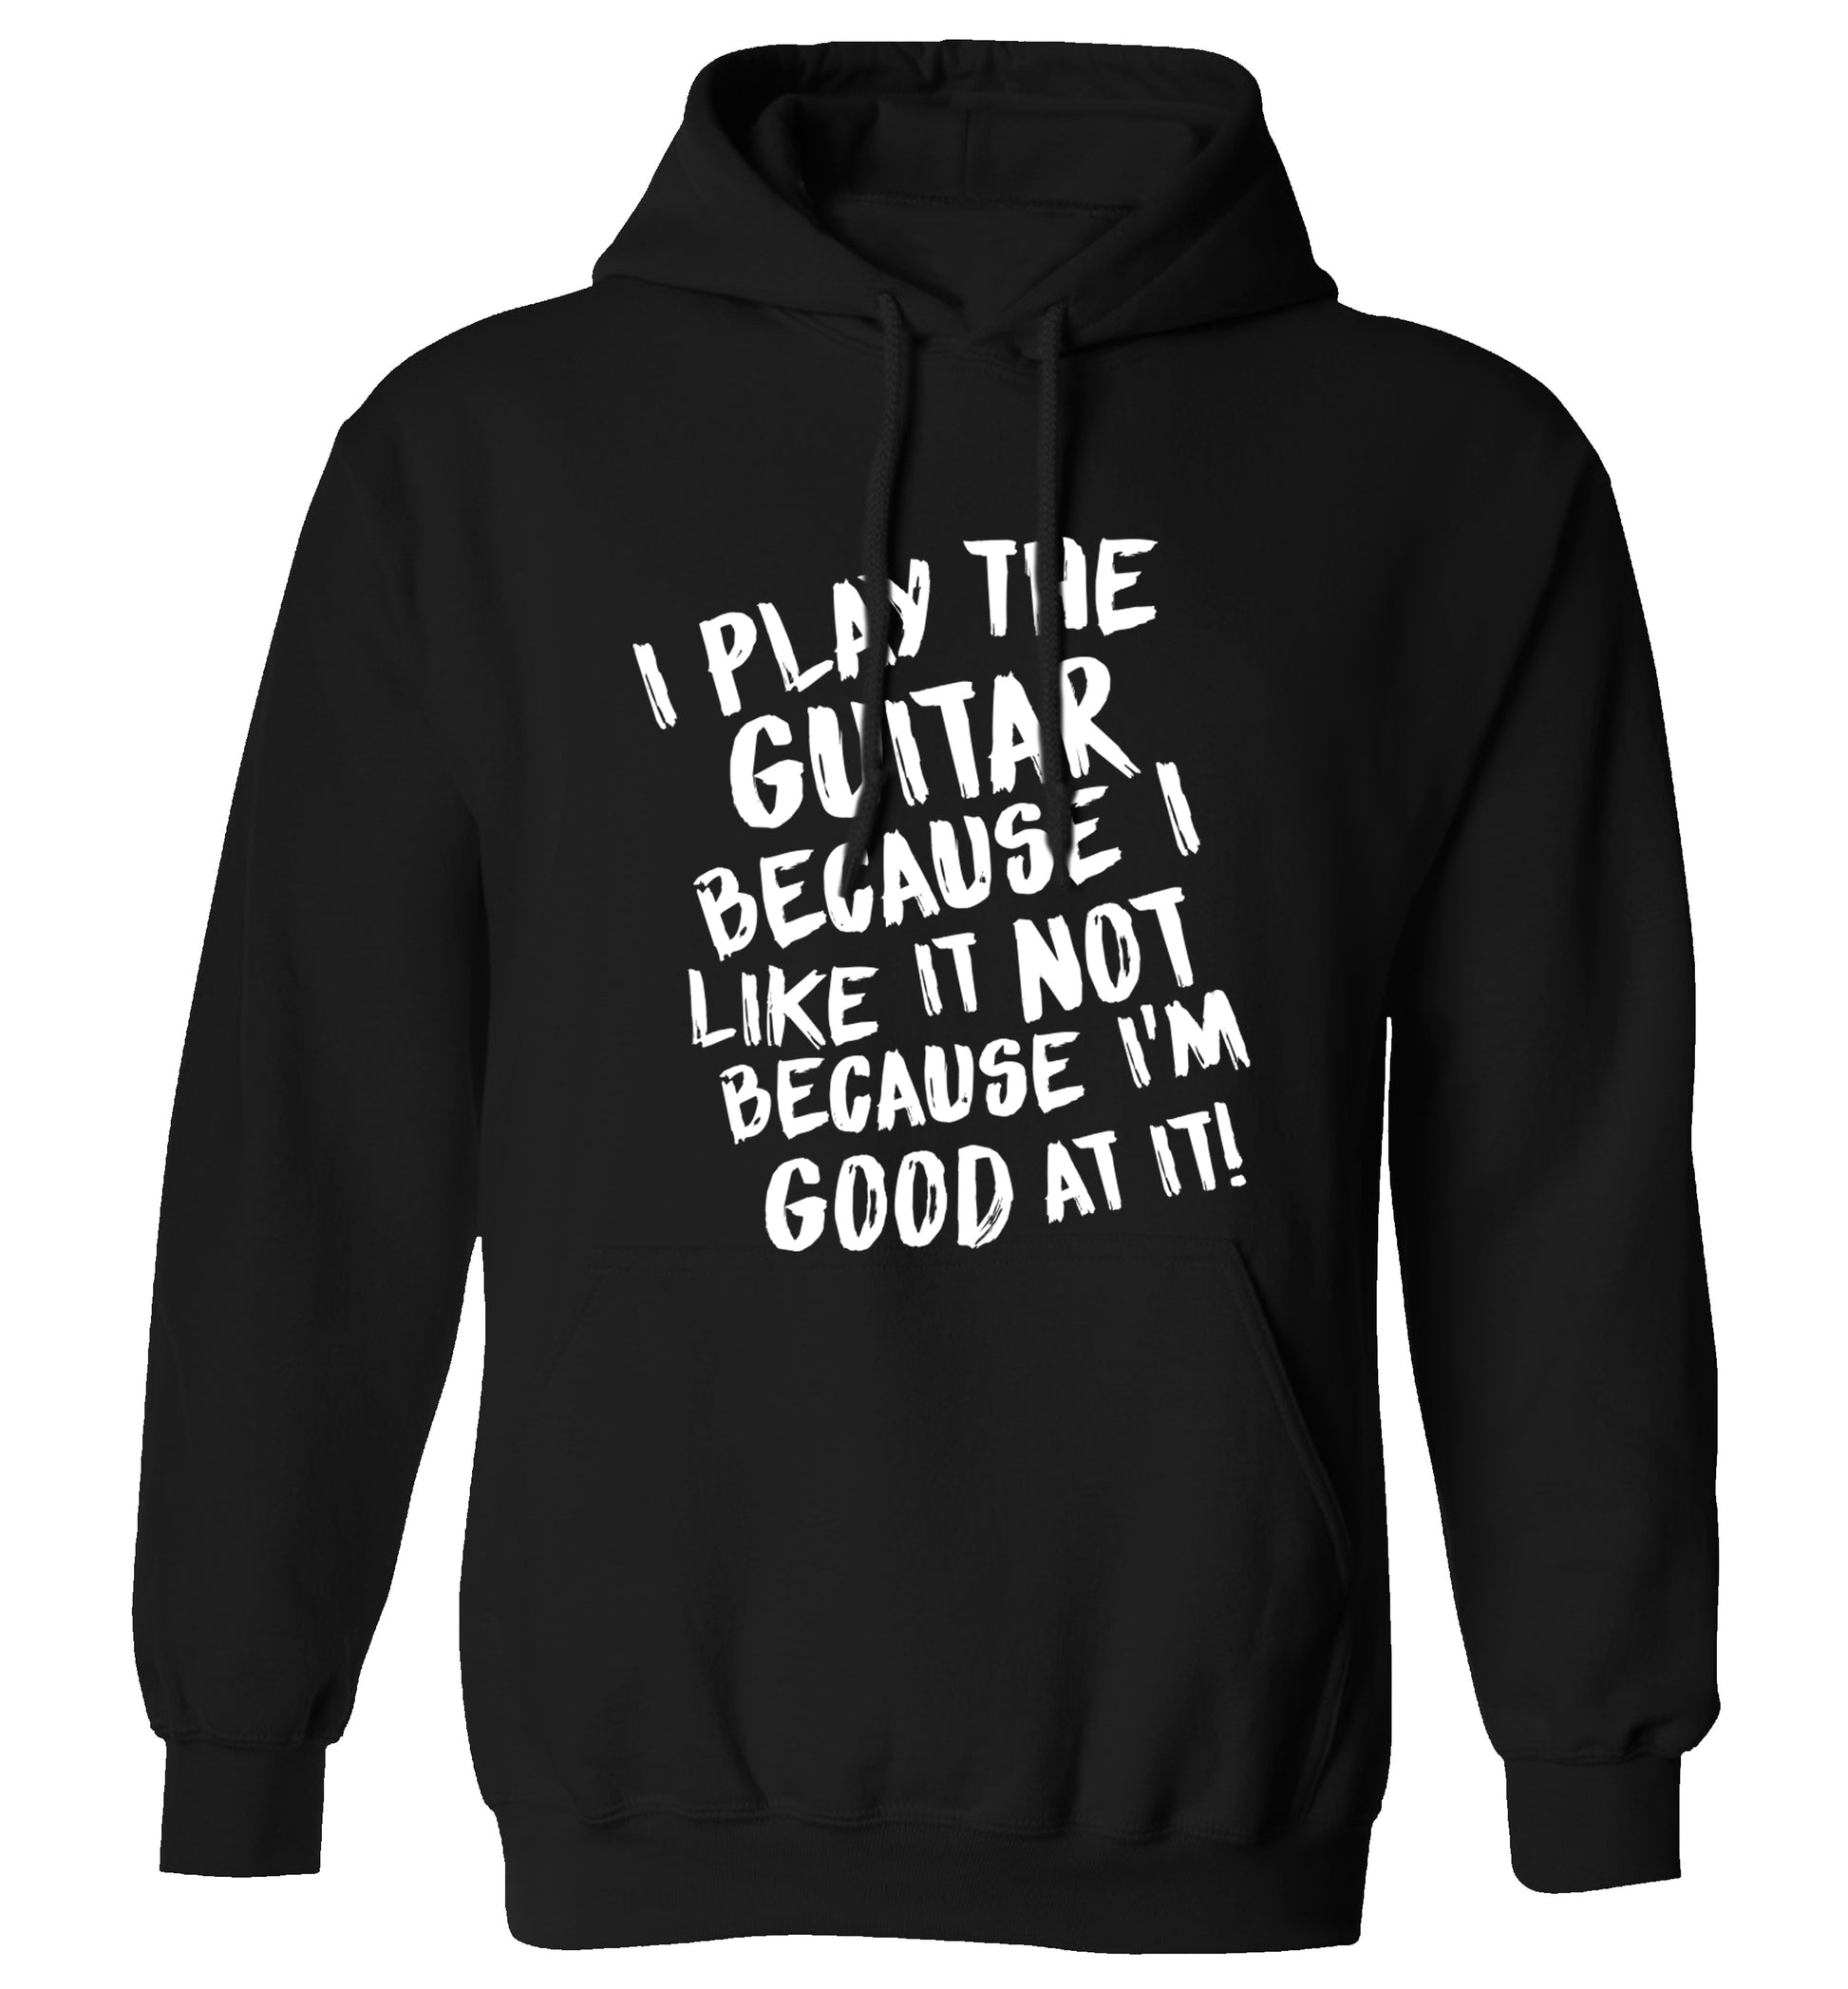 I play the guitar because I like it not because I'm good at it adults unisex black hoodie 2XL